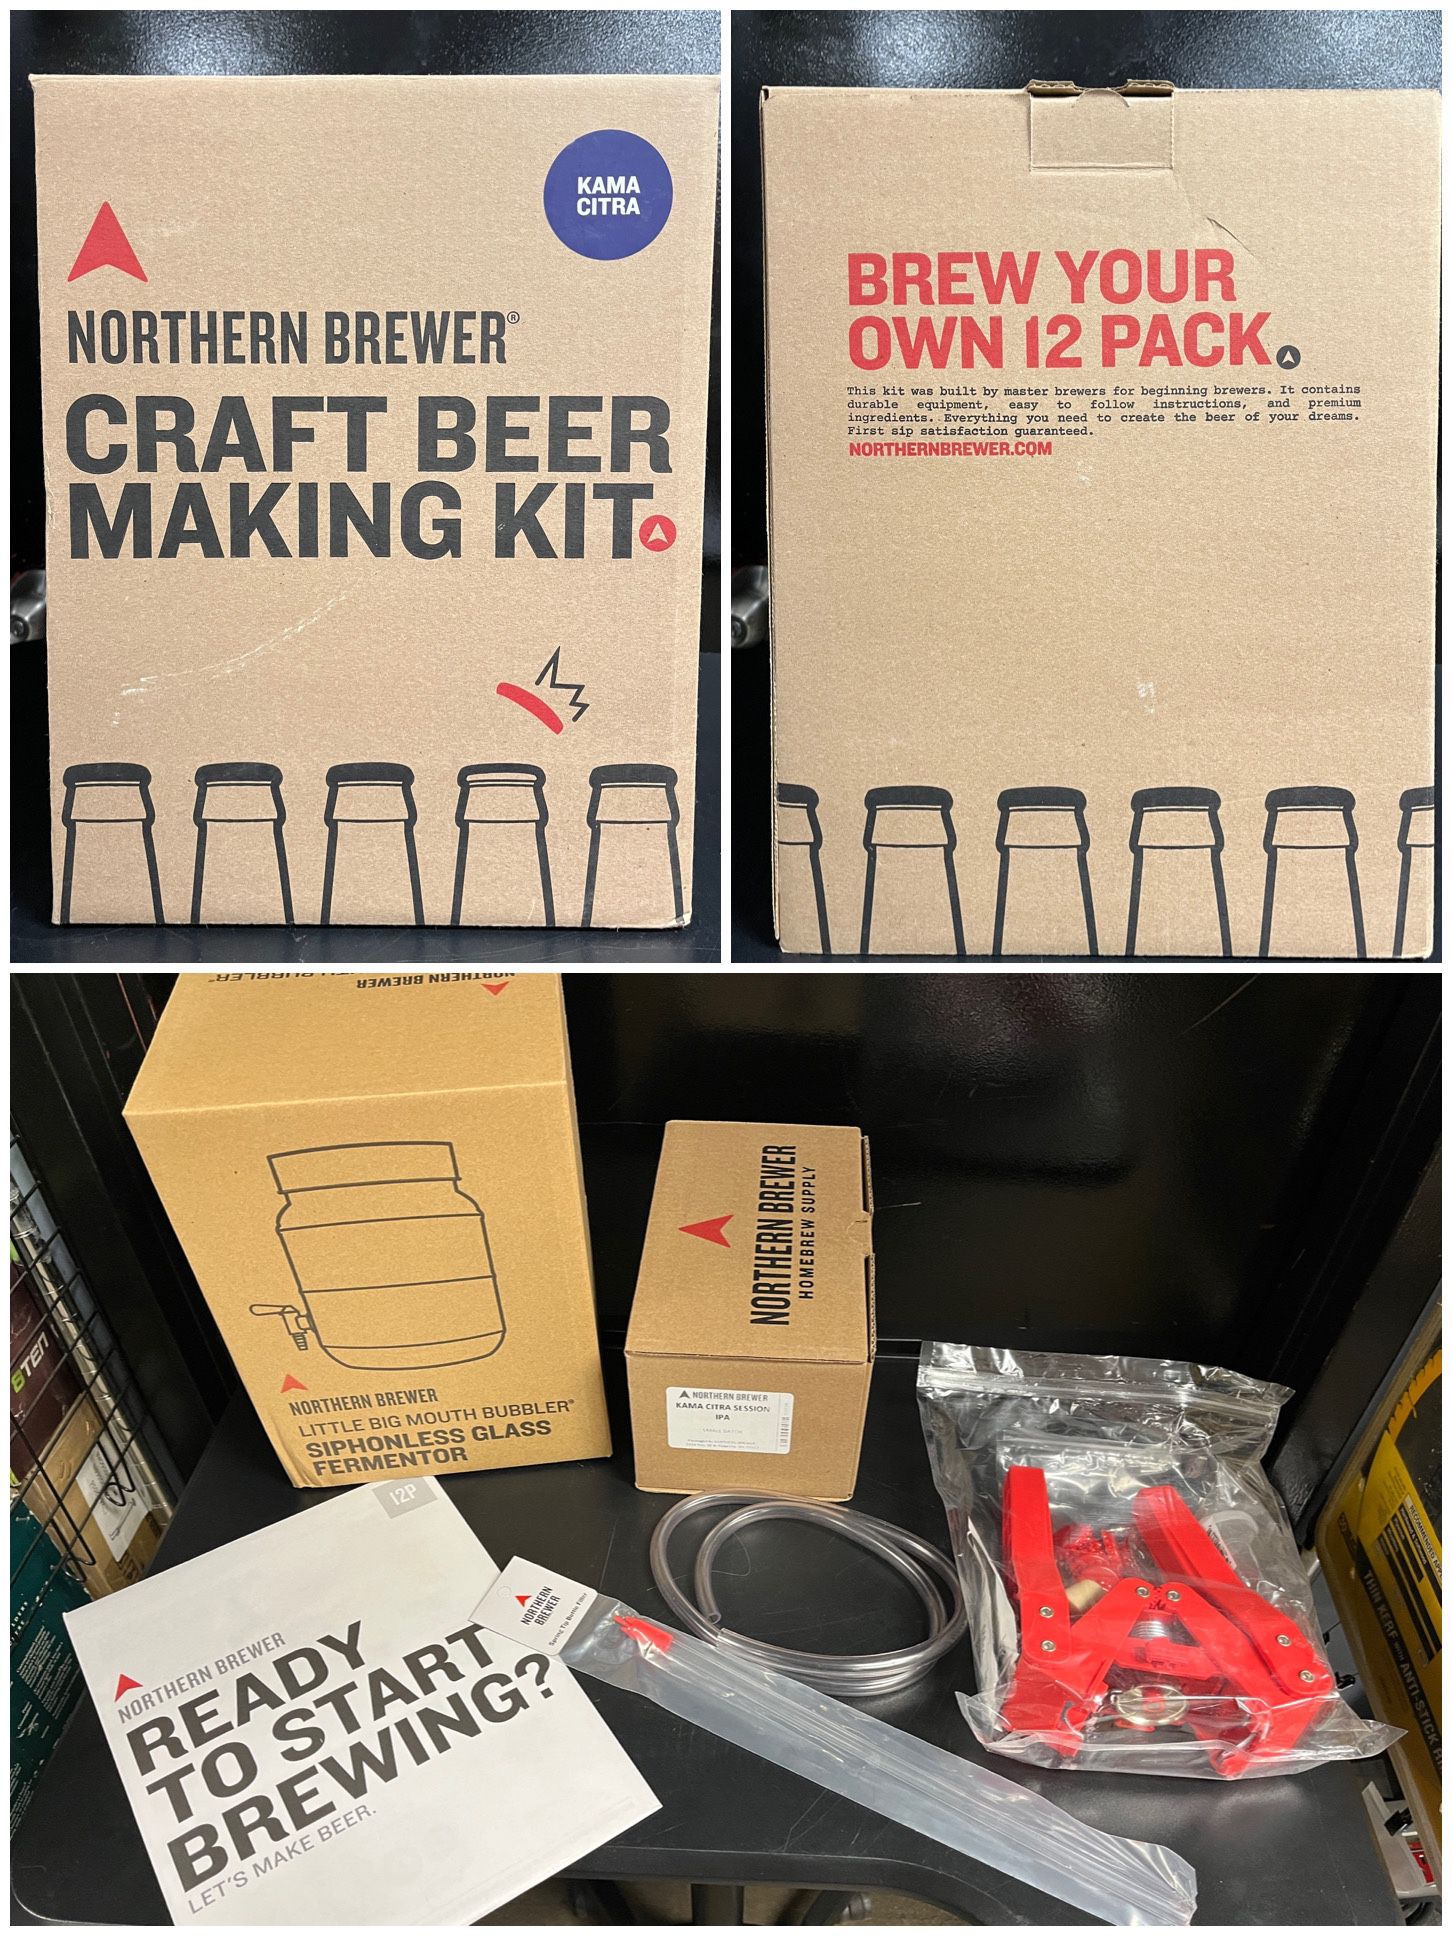 NORTHERN BREWER CRAFT BEER MAKING KIT. КАМА CITRA BREW YOUR OWN 12 PACK.